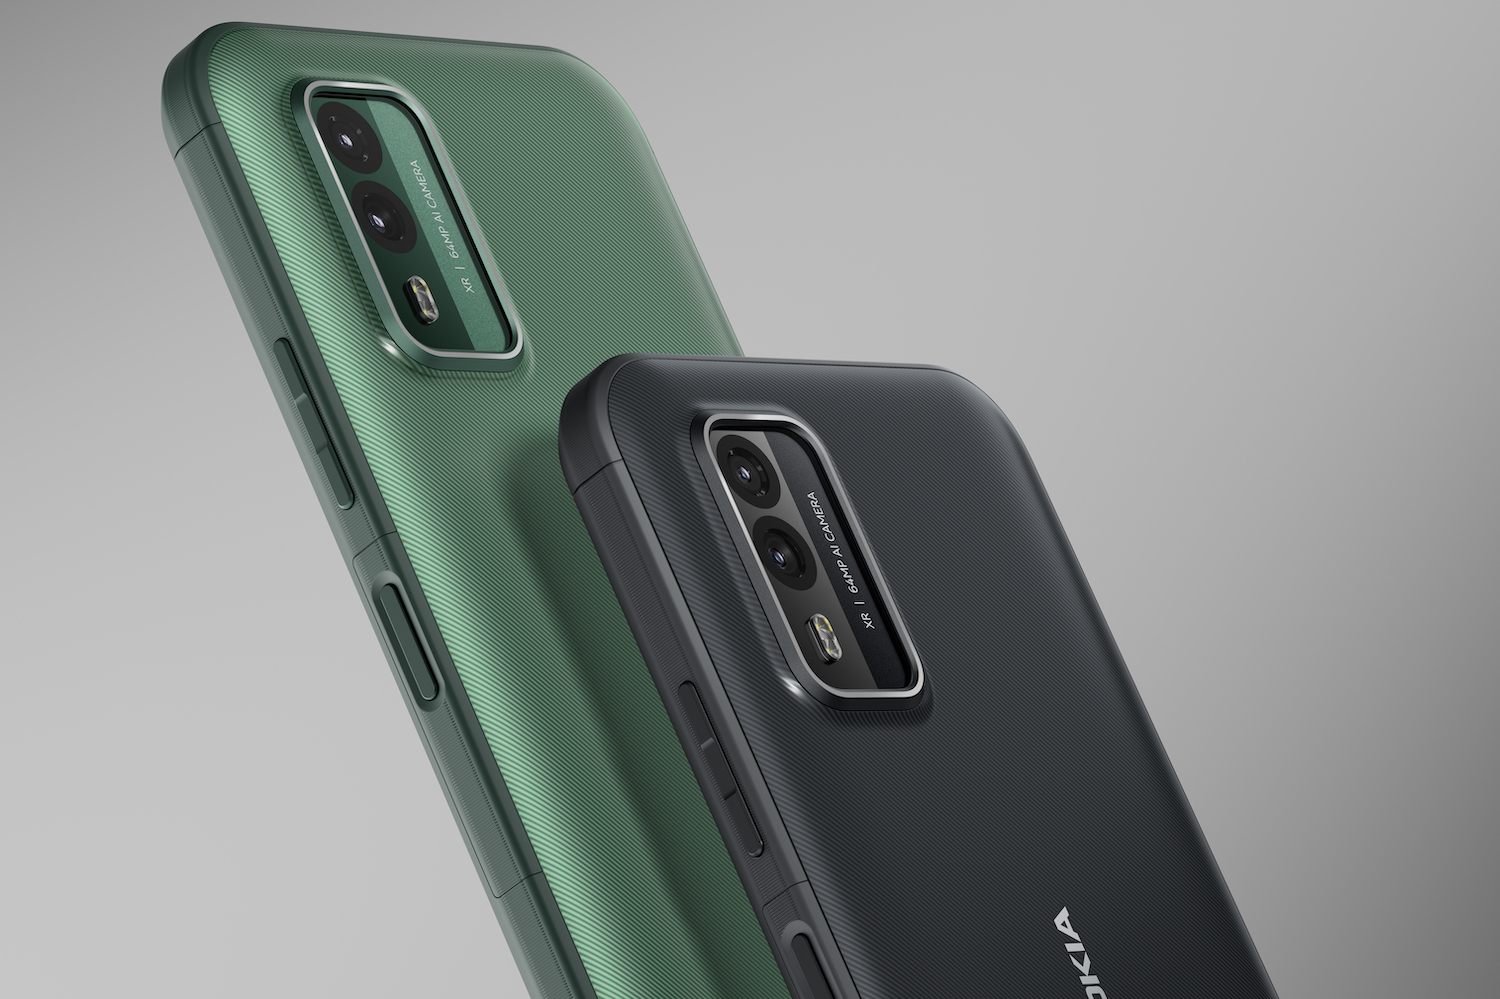 The black and green colors of the Nokia XR21.